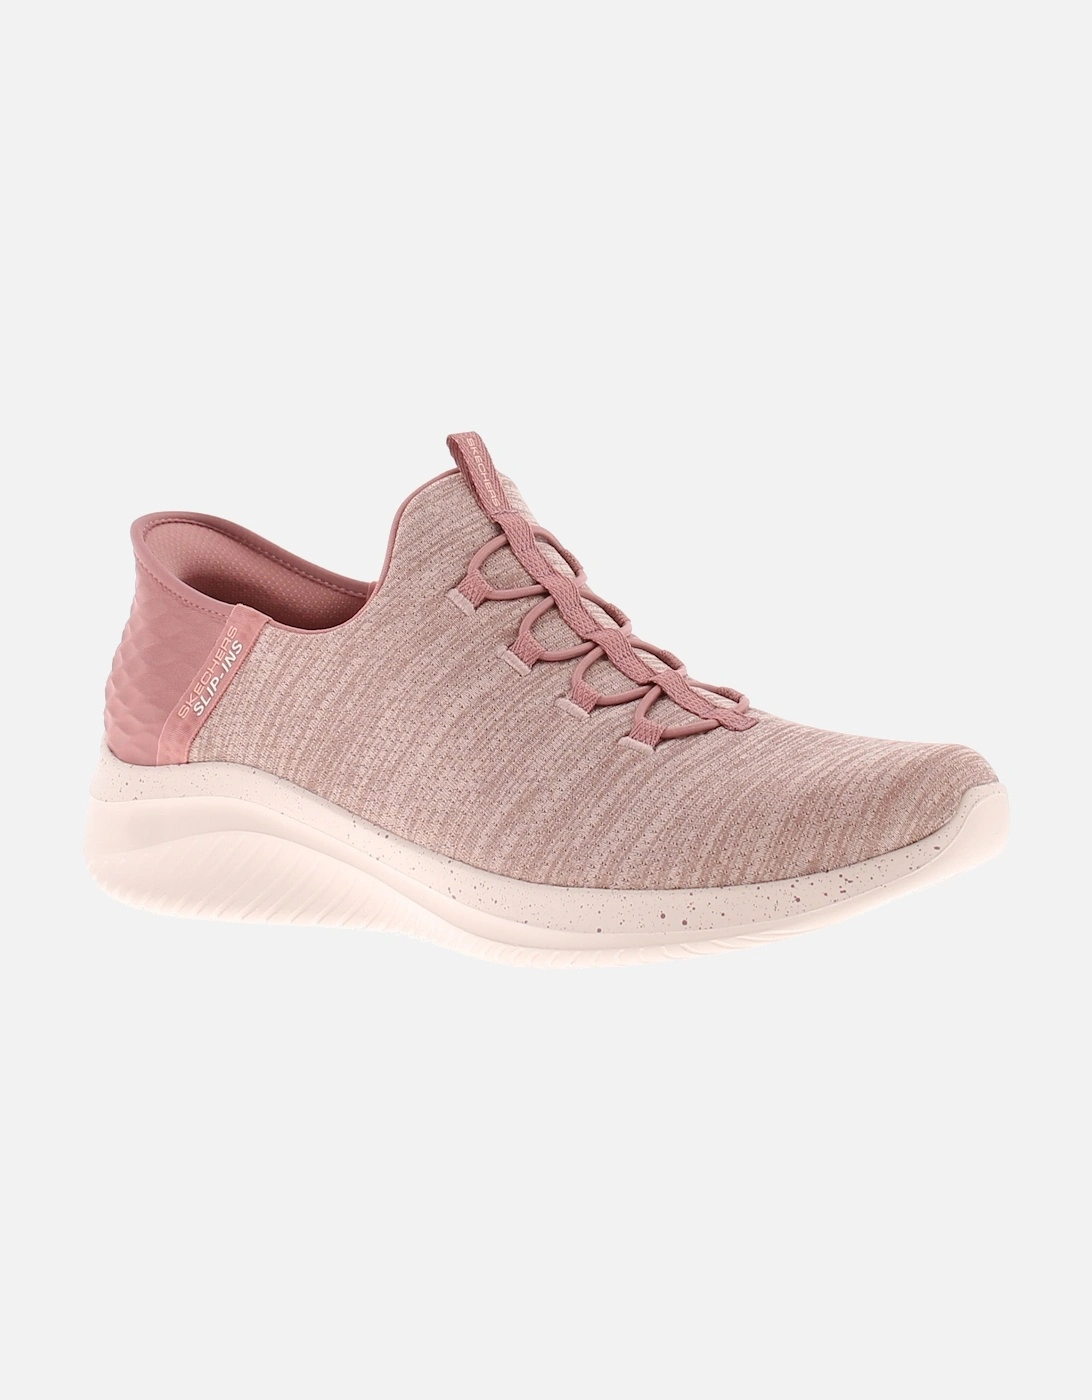 Womens Slip-Ins Trainers Ultra Flex 3 0 right rose UK Size, 6 of 5